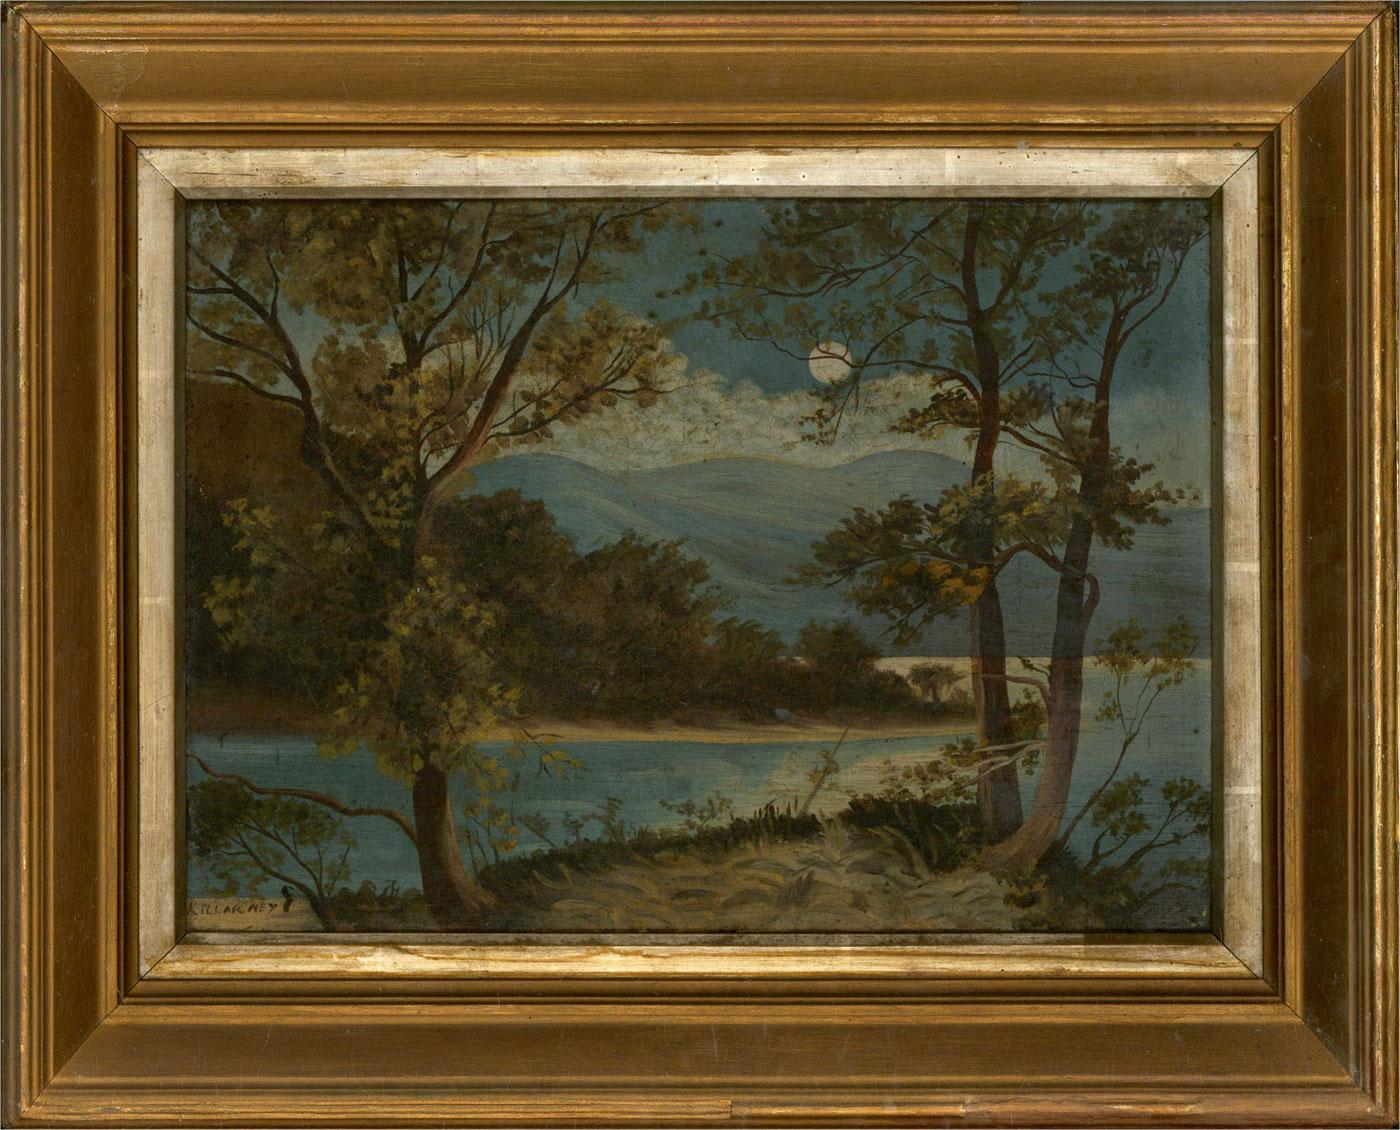 Unknown Landscape Painting - Turn of the Century Oil - Moonlight Over The Lake